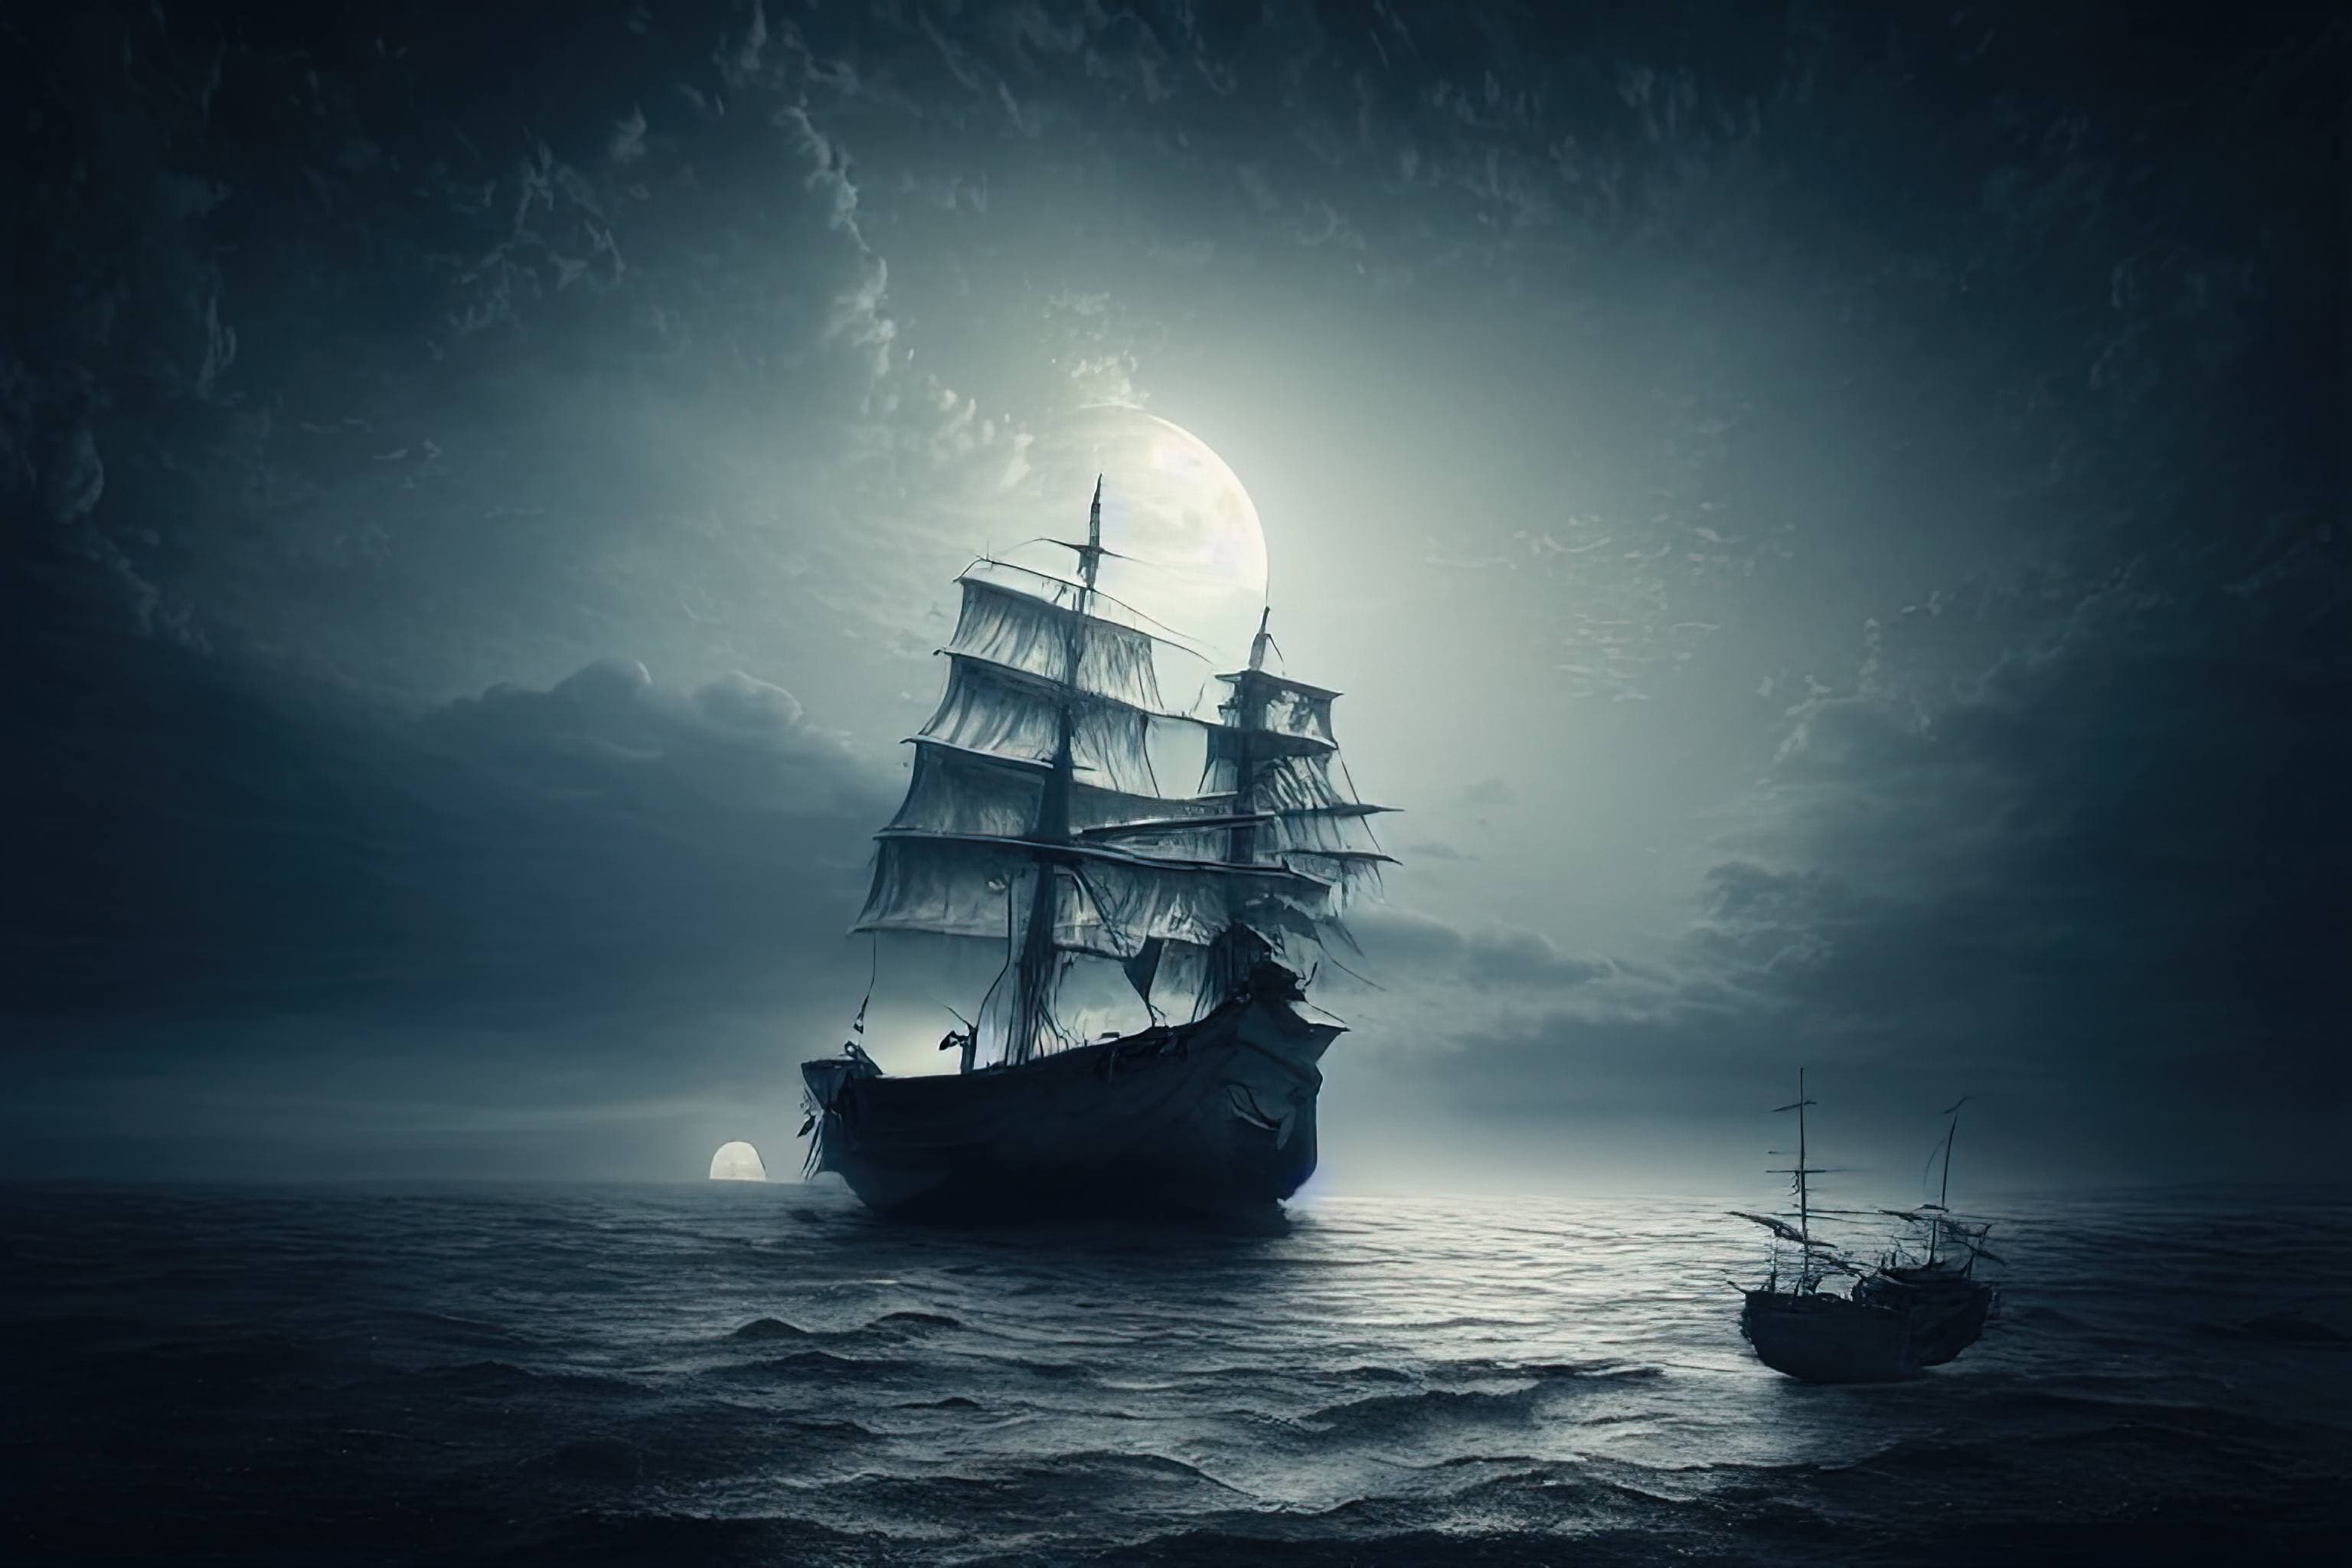 A ship sailing on the ocean at night - Pirate